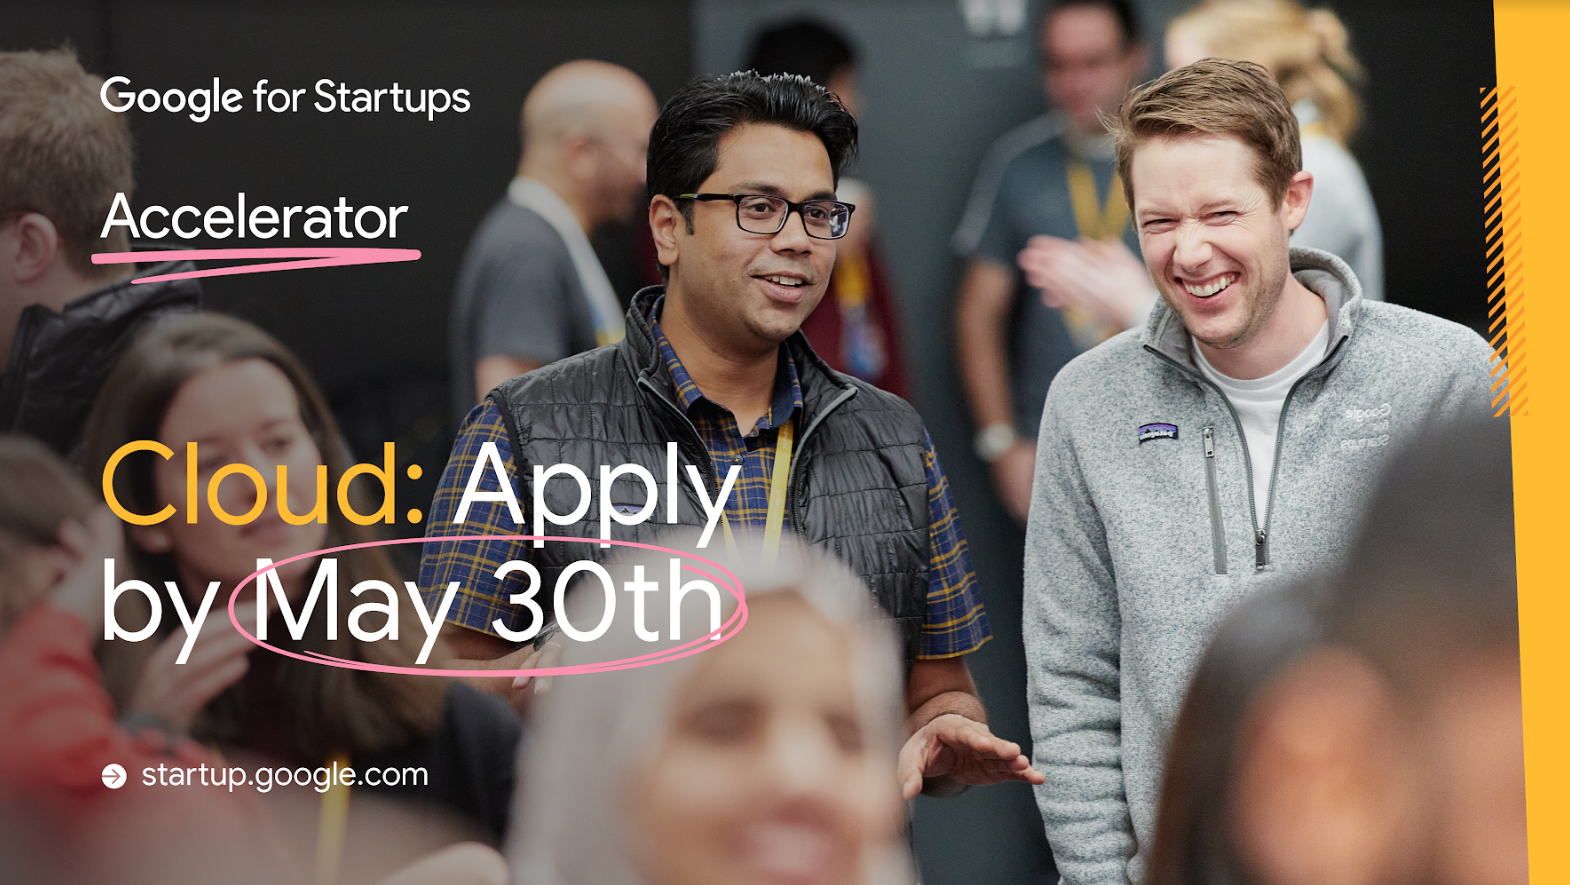 A photo of two men talking in the middle of a crown. The photo also has text on it that says: 'Cloud: Apply by May 30th' and the logo of Google for Startups Accelera